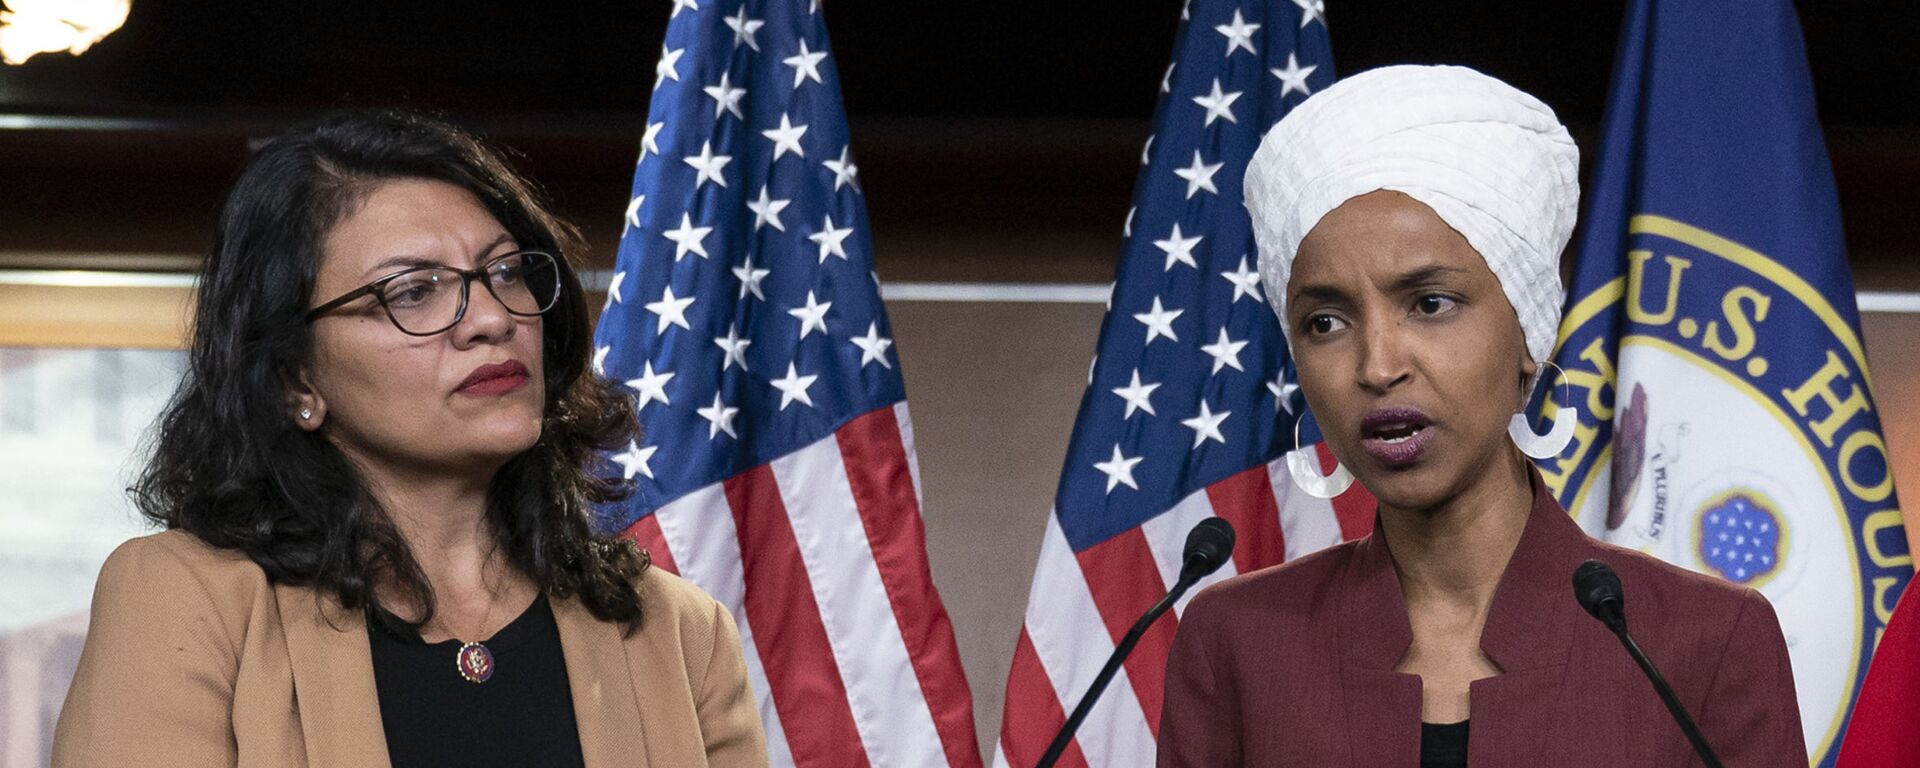 In this July 15, 2019, file photo, U.S. Rep. Ilhan Omar, D-Minn, right, speaks, as U.S. Rep. Rashida Tlaib, D-Mich. listens, during a news conference at the Capitol in Washington. - Sputnik India, 1920, 22.06.2023